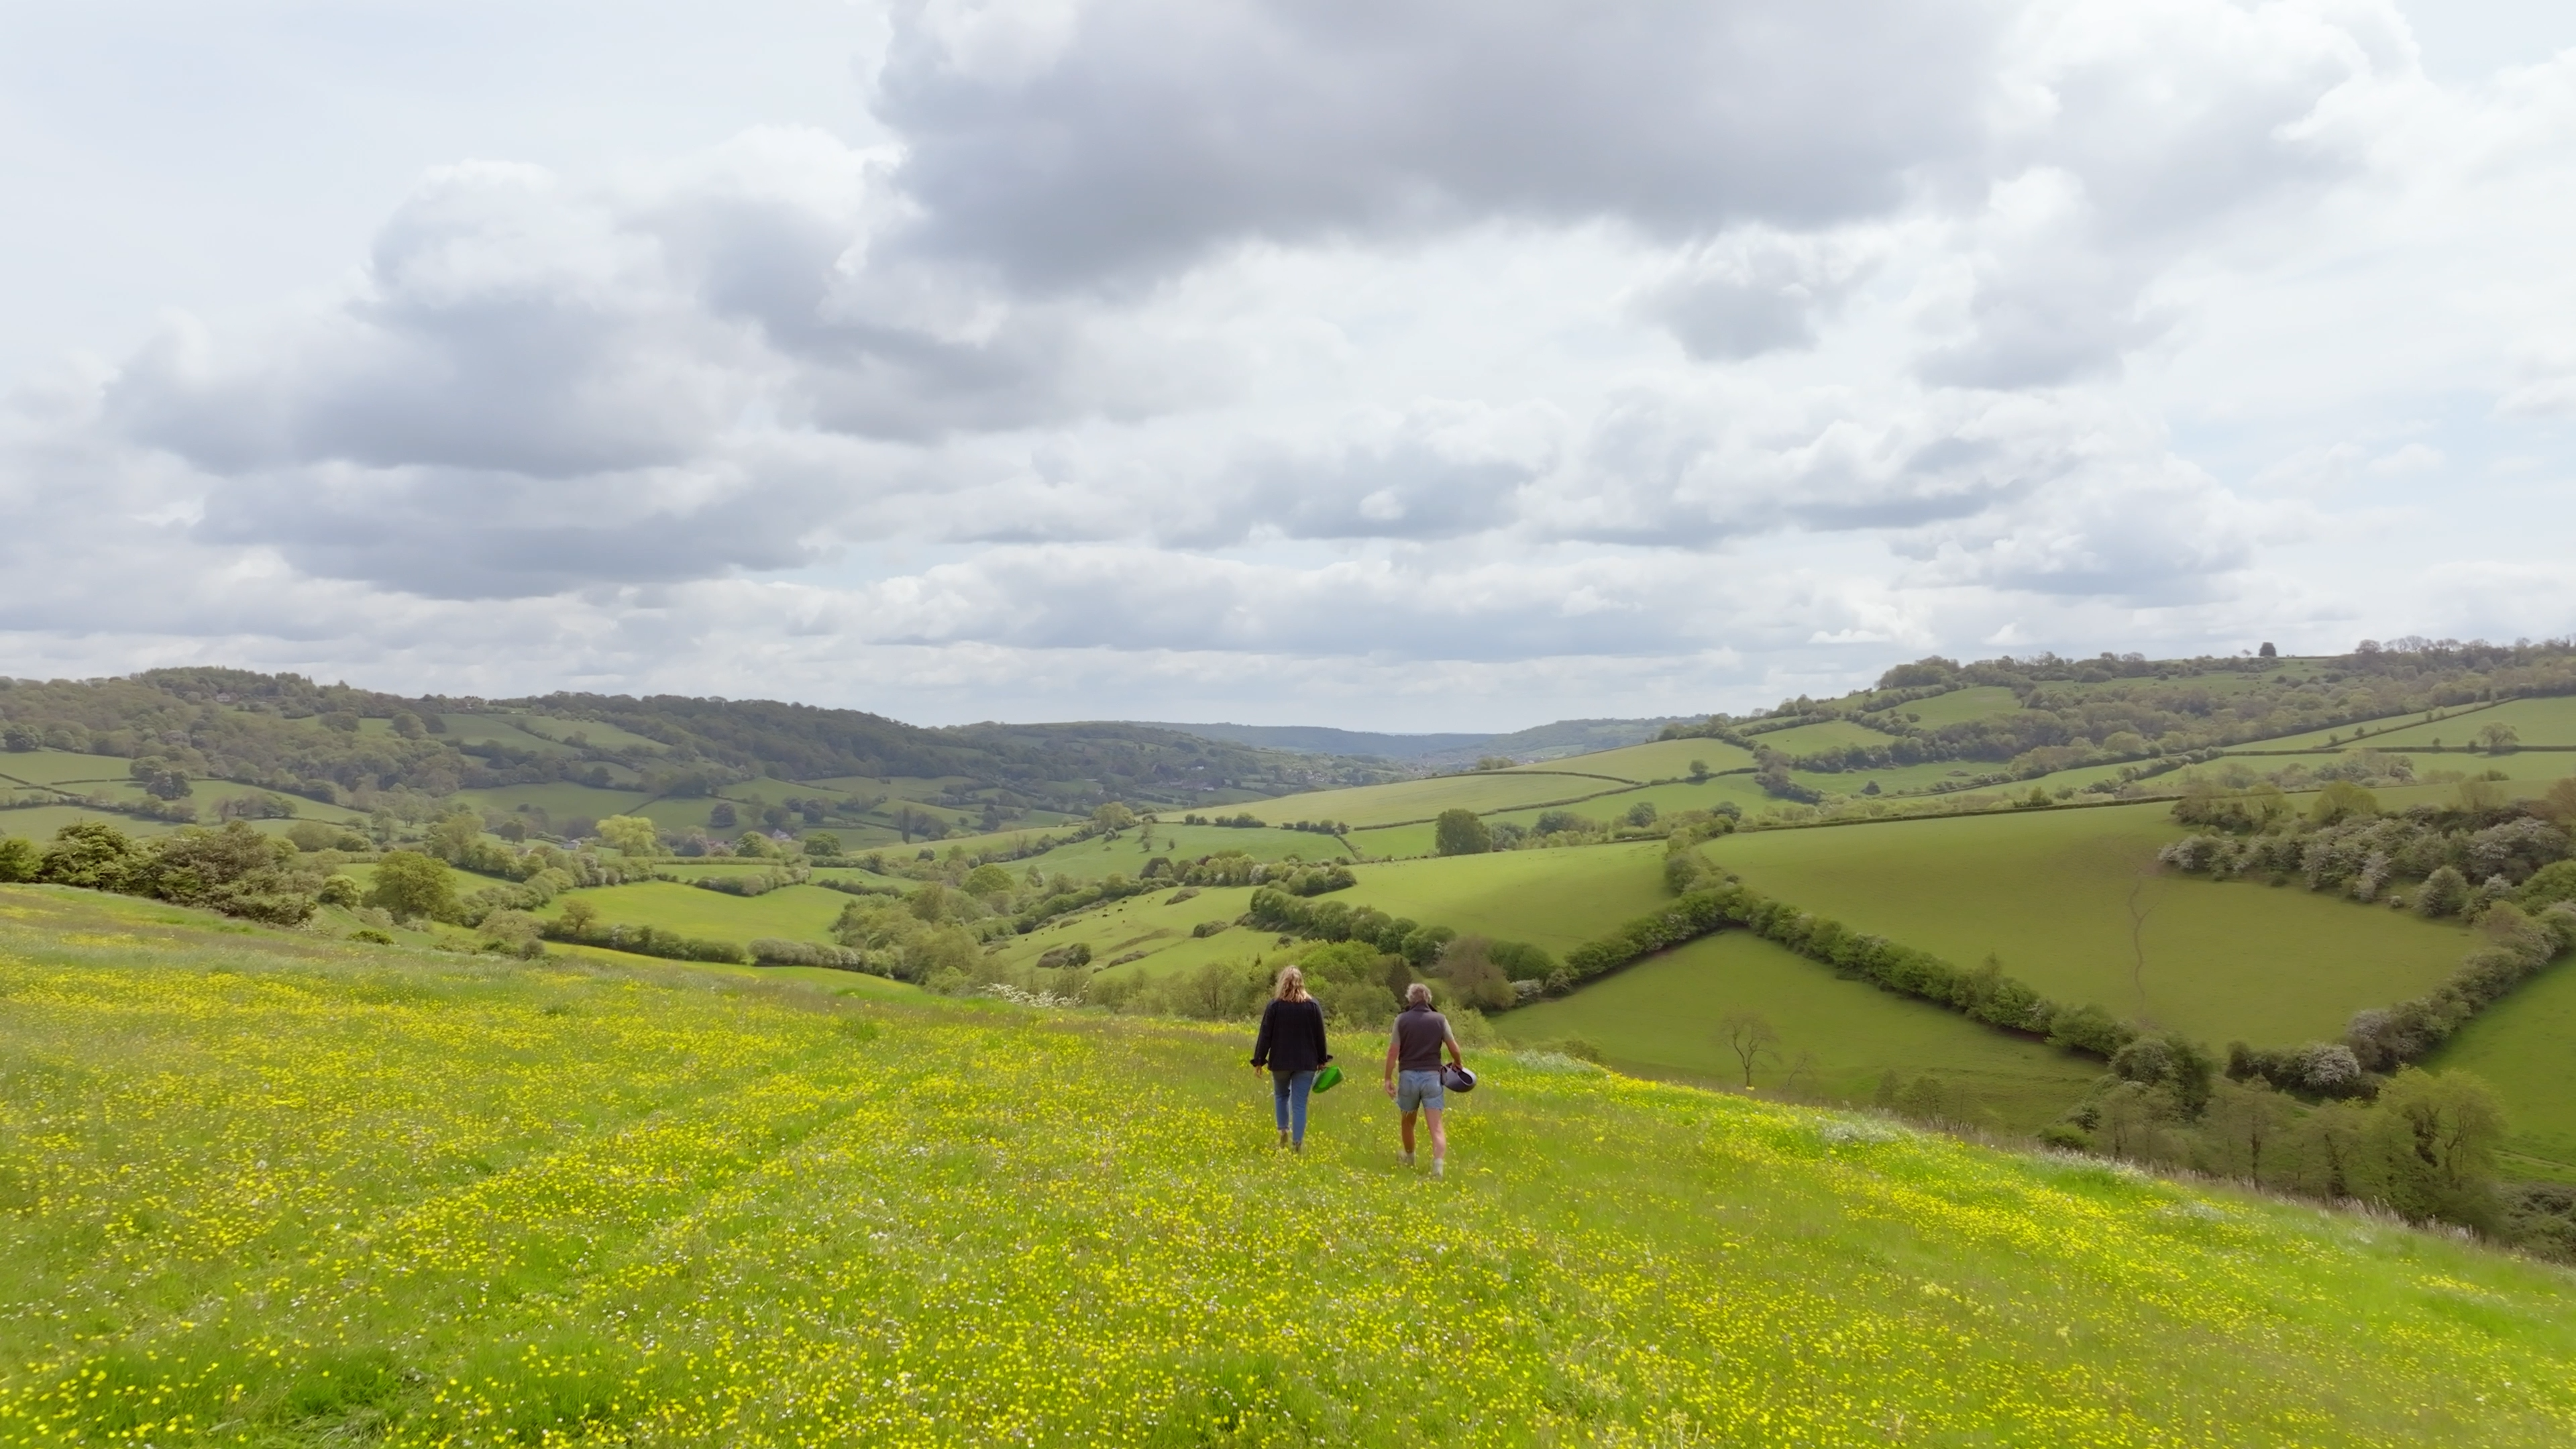 An English pastoral landscape with green grass and rolling hills.